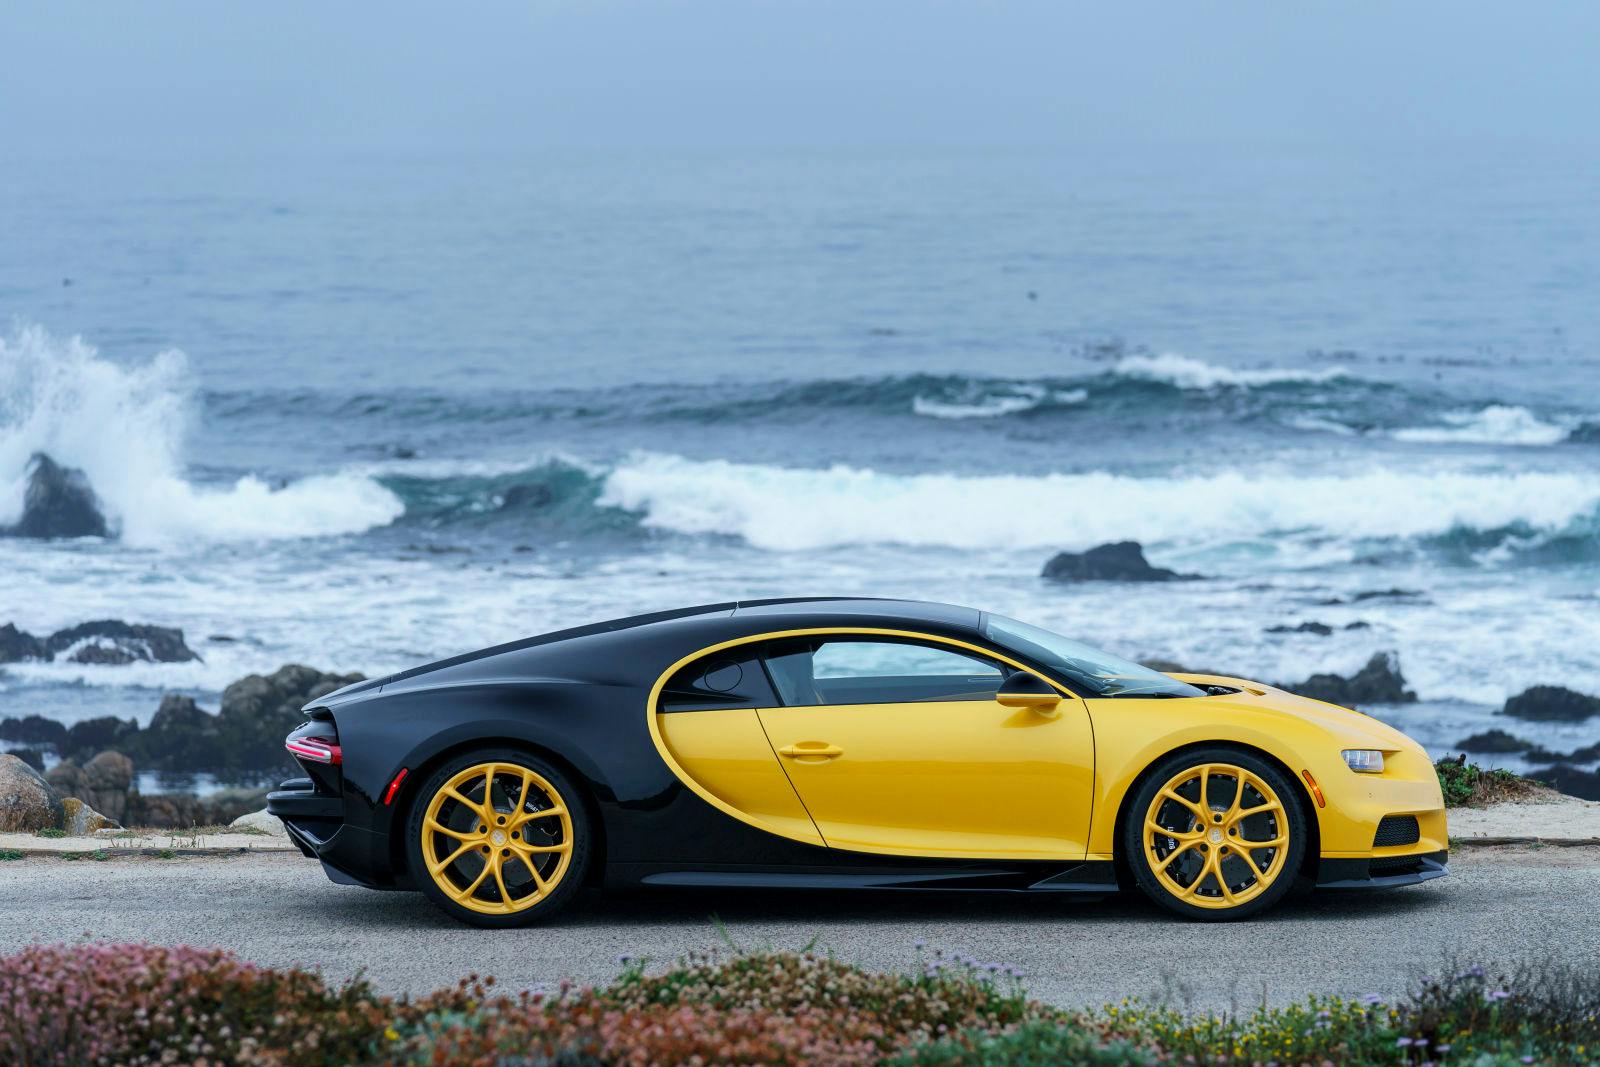 The very first Bugatti Chiron delivered to North America was finished in a striking yellow and bare black carbon combination.